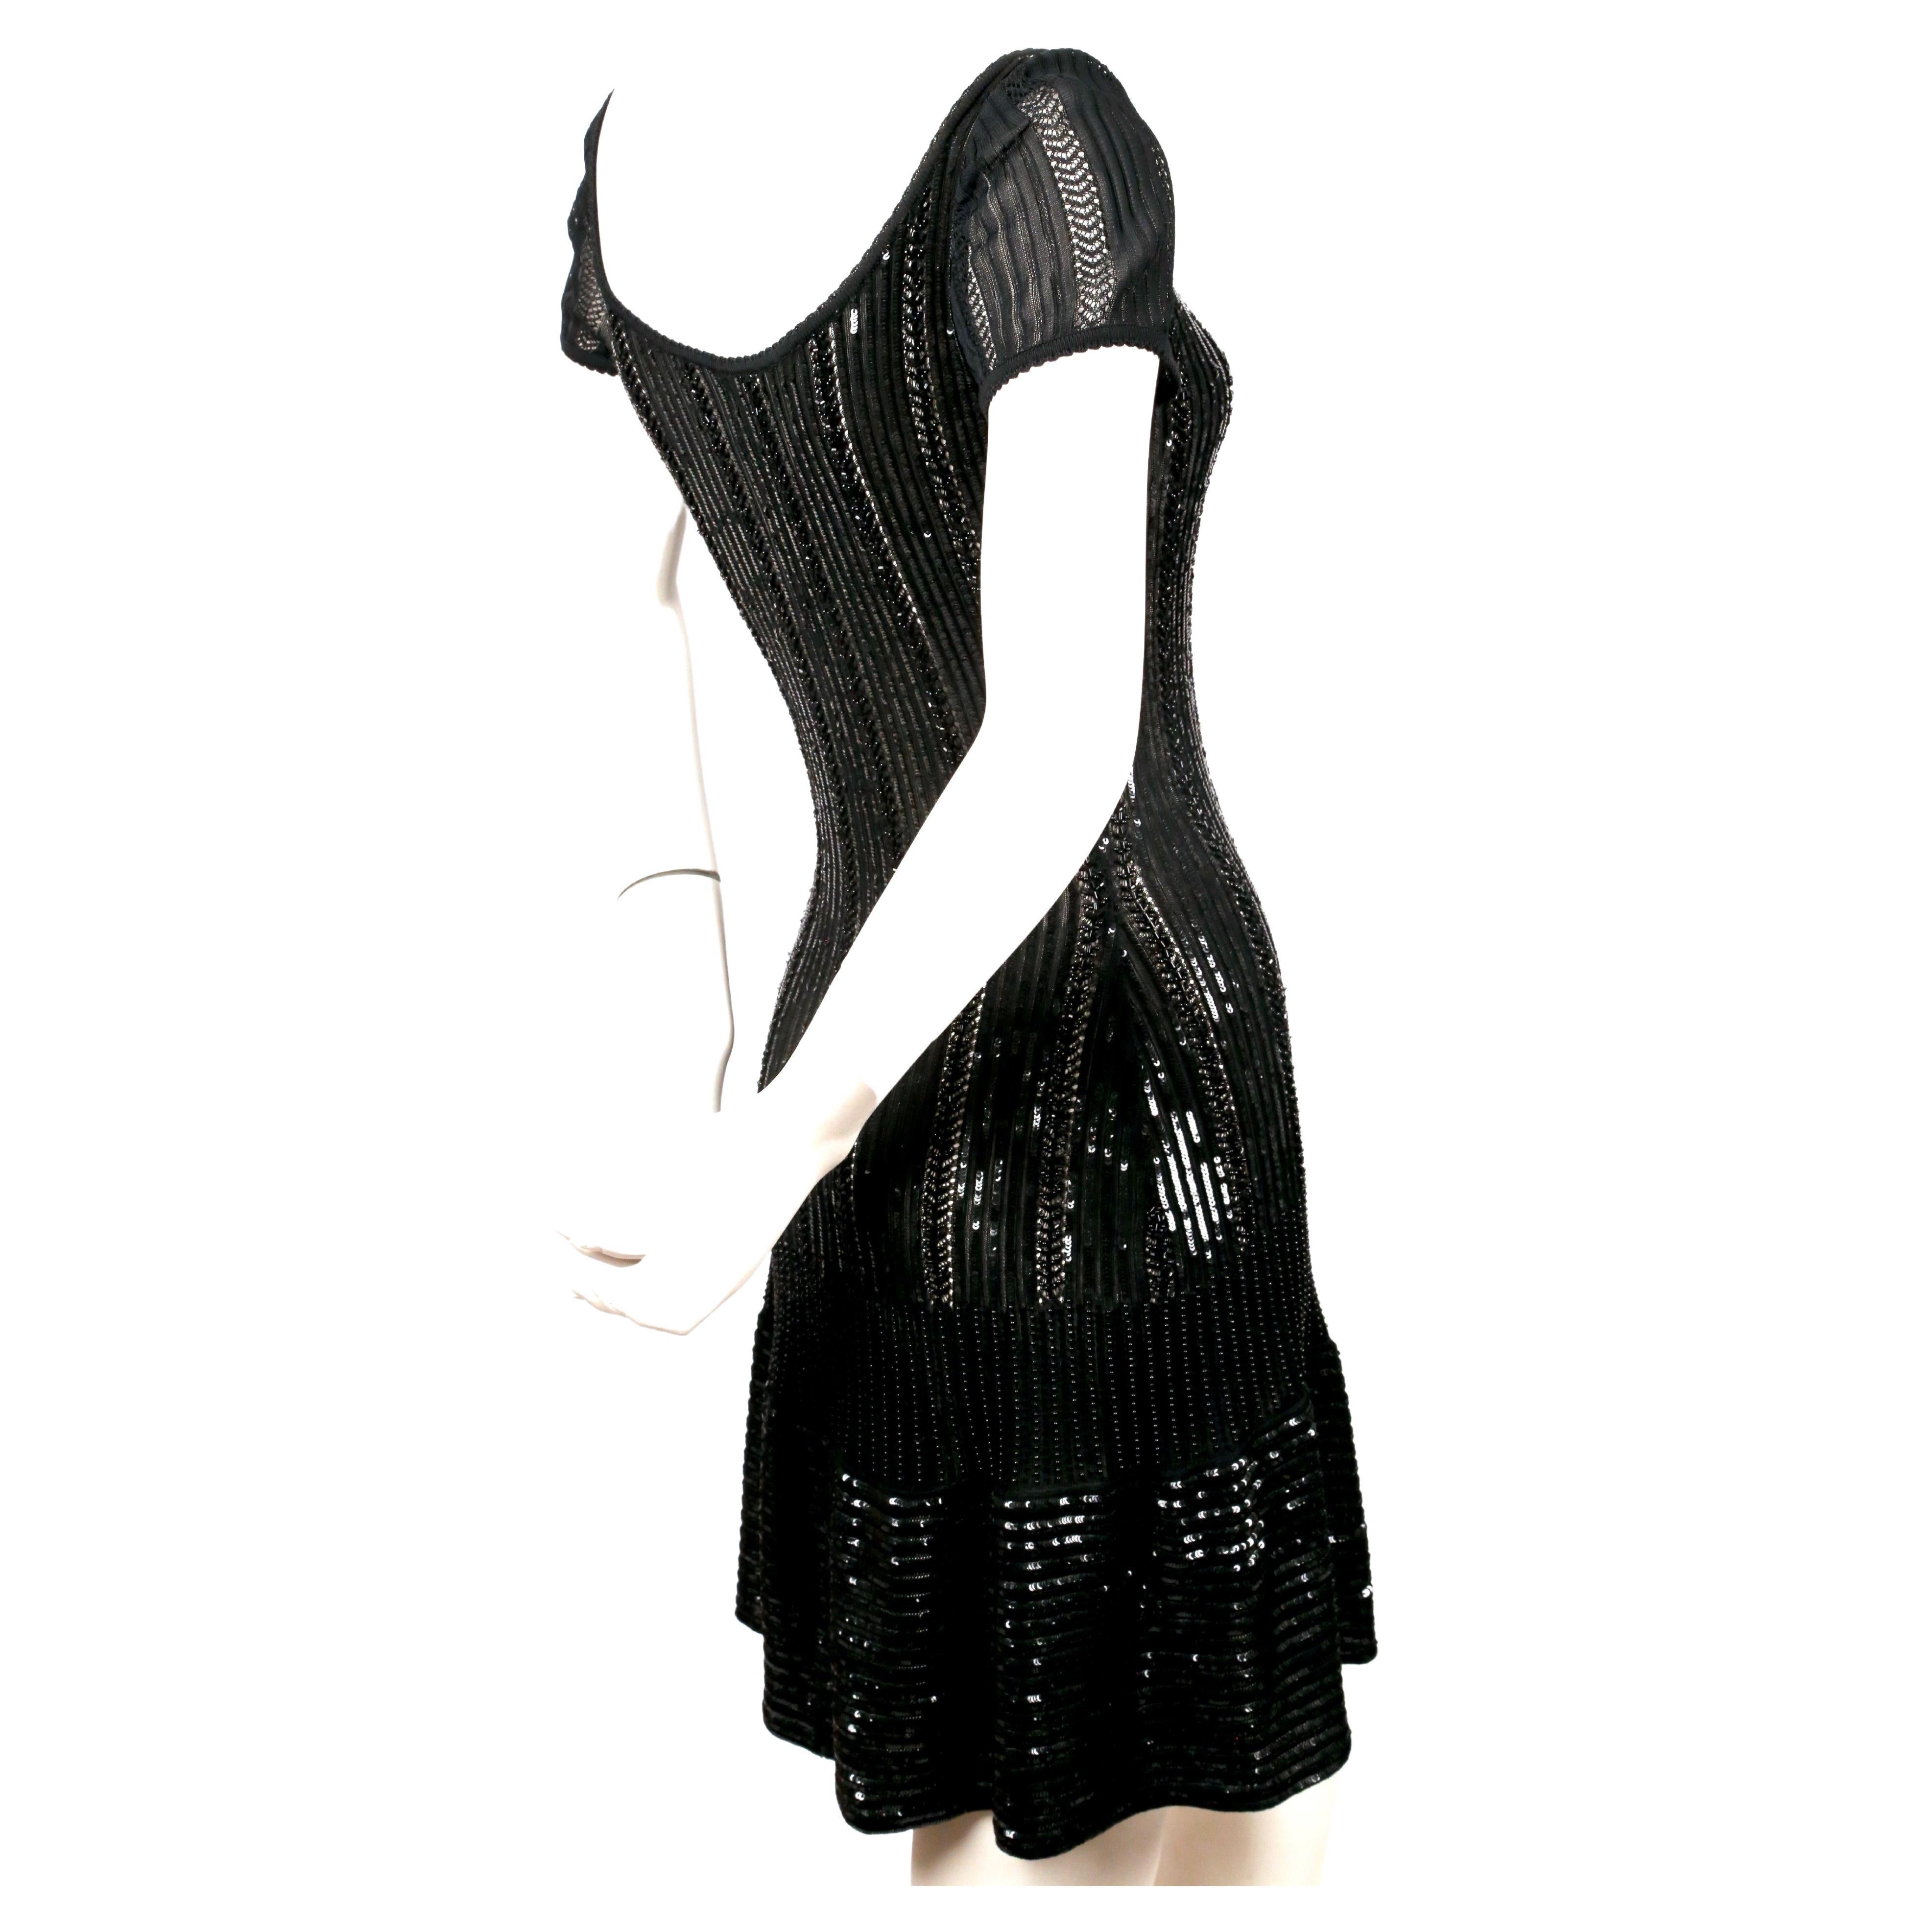 1996 AZZEDINE ALAIA black beaded and micro sequined dress In Excellent Condition For Sale In San Fransisco, CA